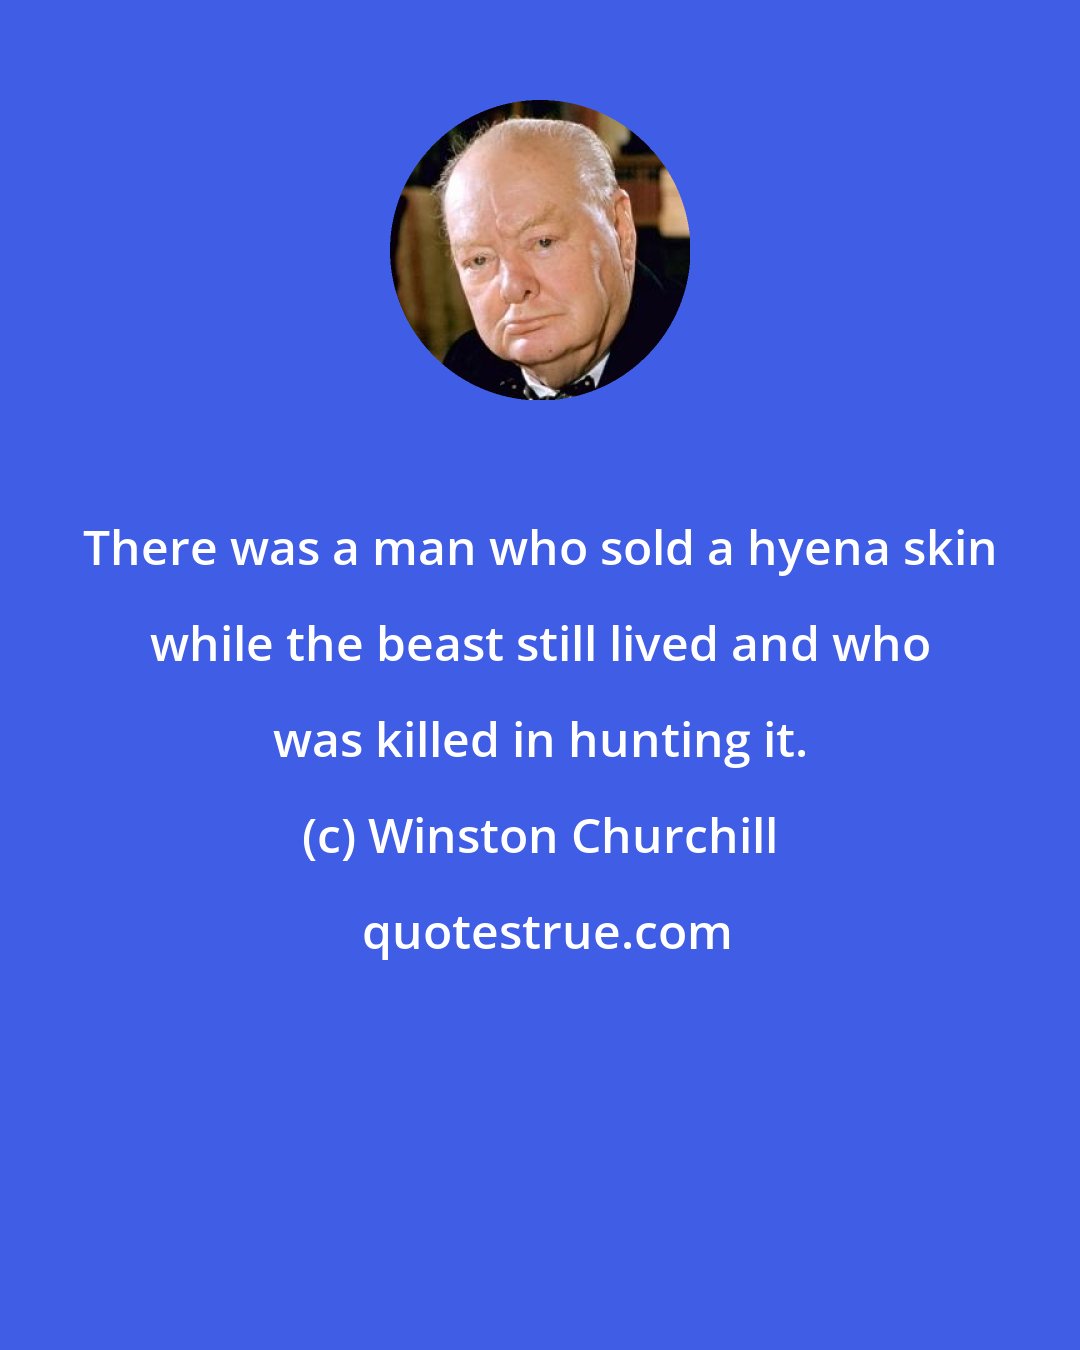 Winston Churchill: There was a man who sold a hyena skin while the beast still lived and who was killed in hunting it.